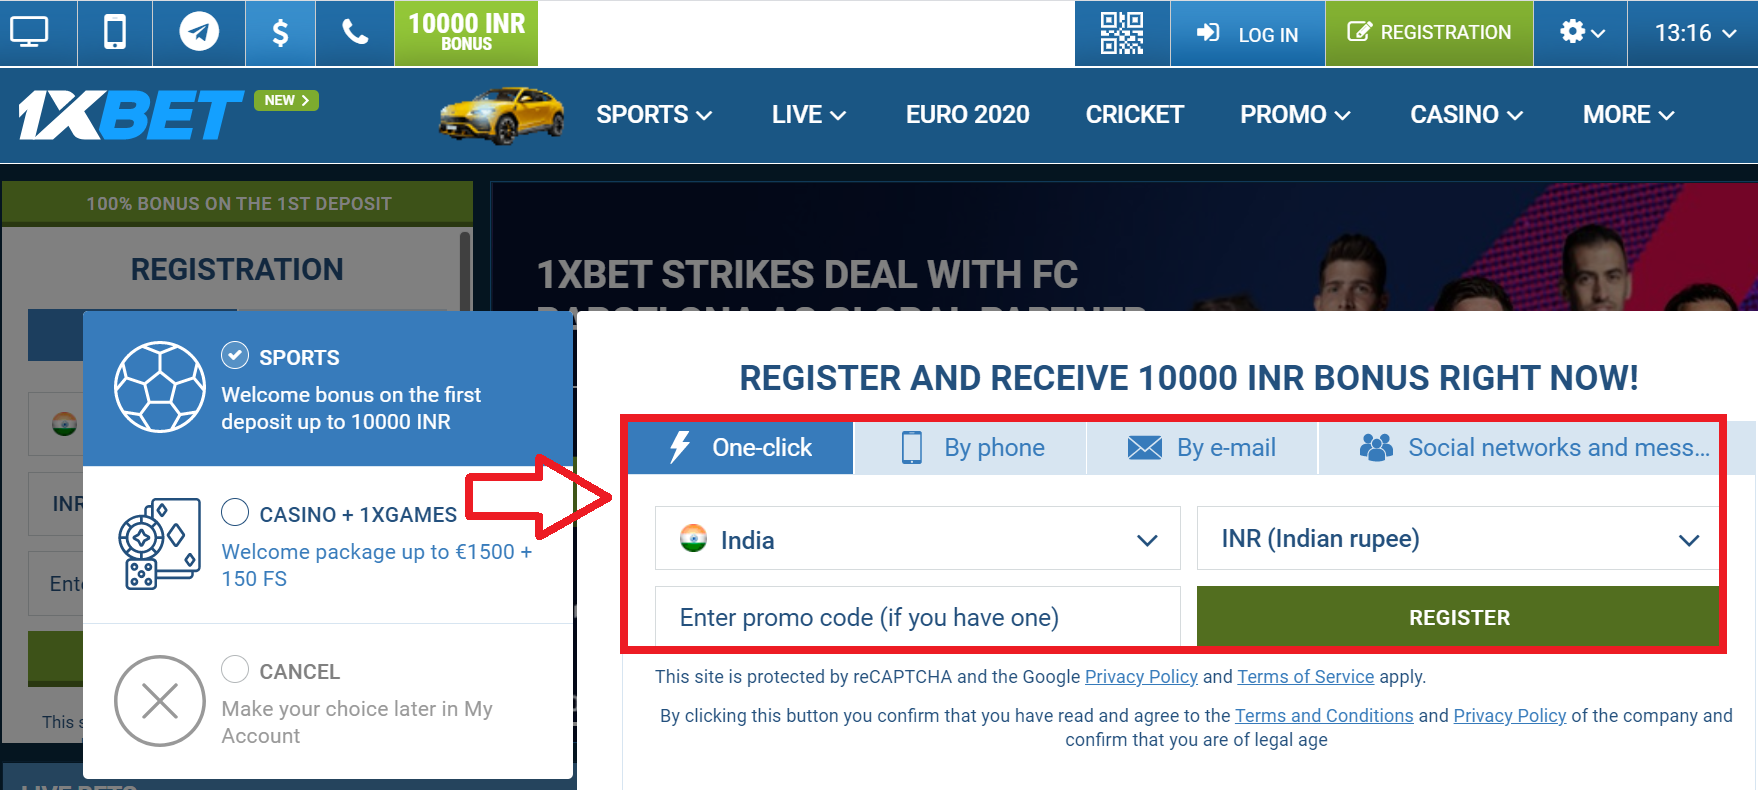 Methods of registration at the bookmaker company 1xBet